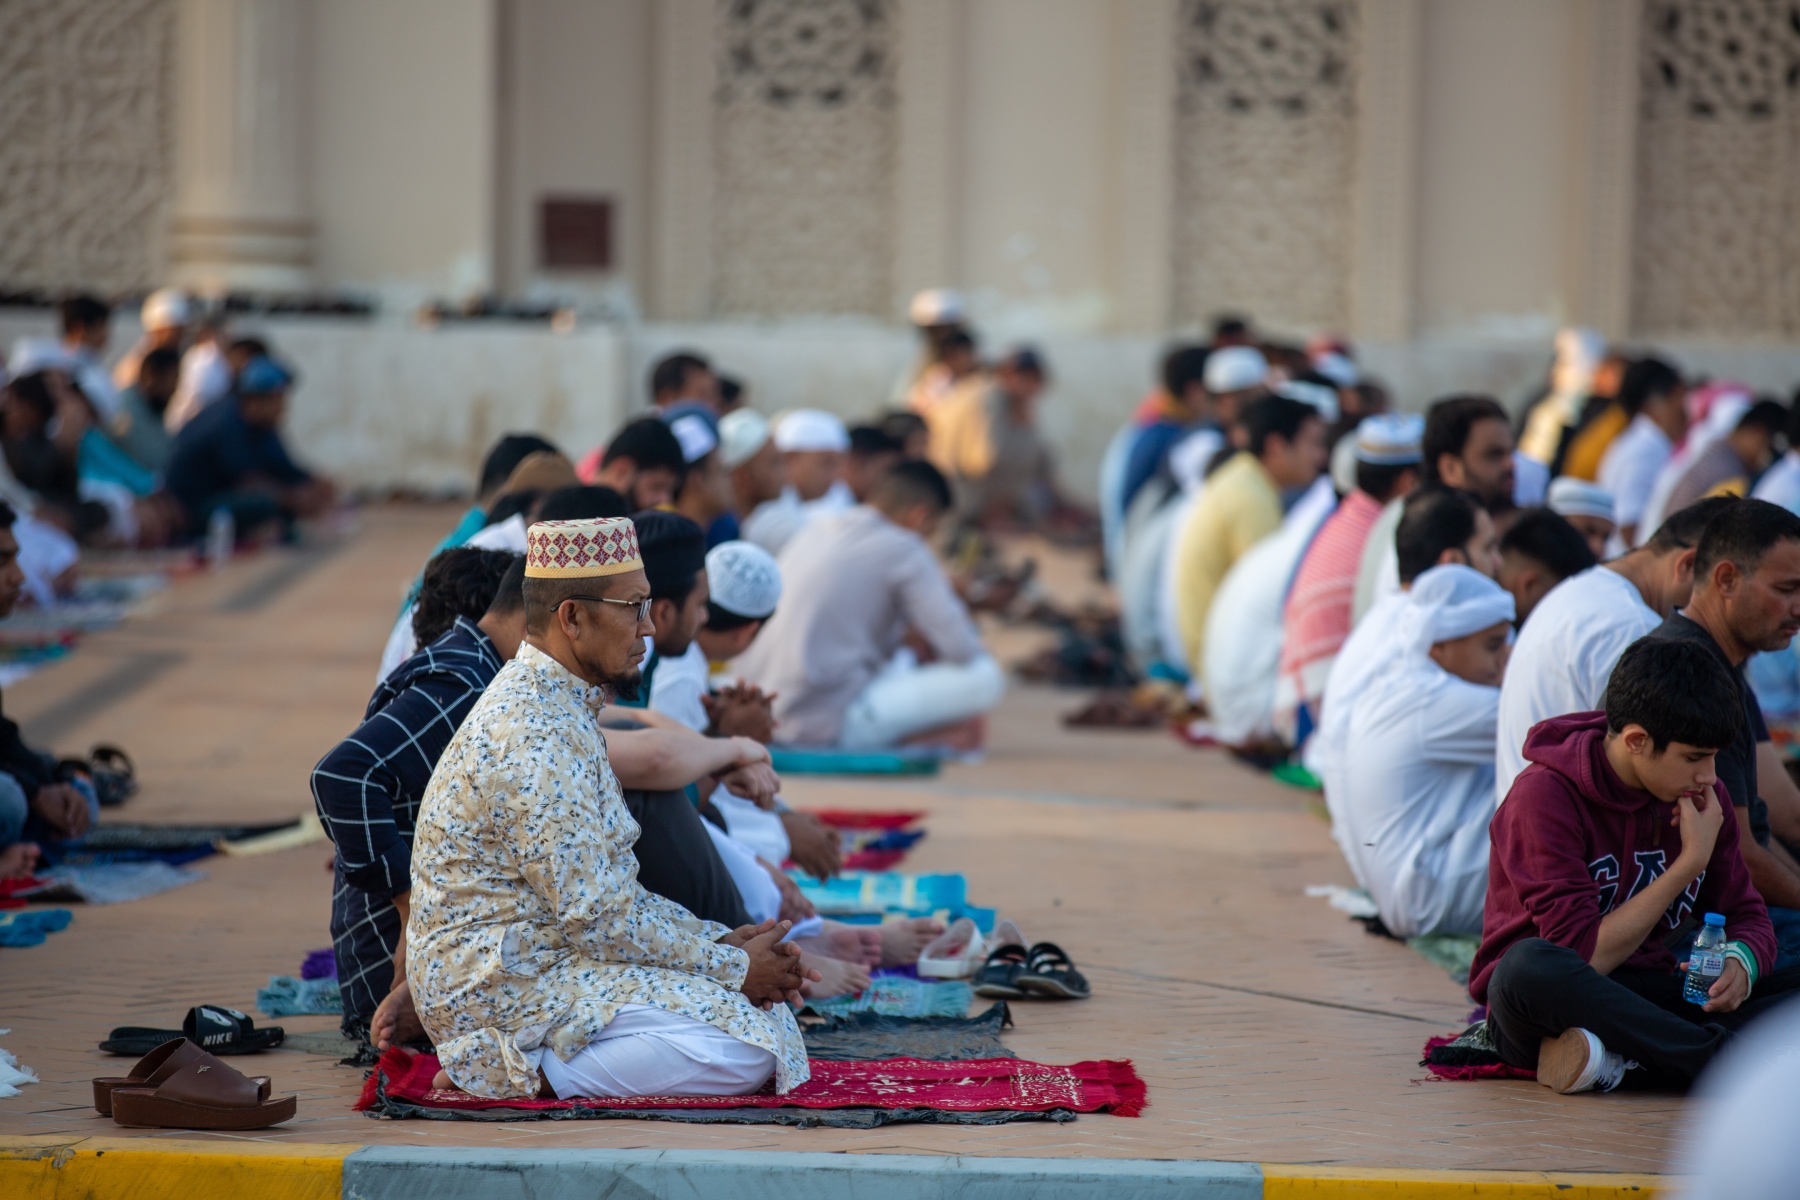 People kneel outside and pray as part of the Eid-al-Fitr celebration in the UAE